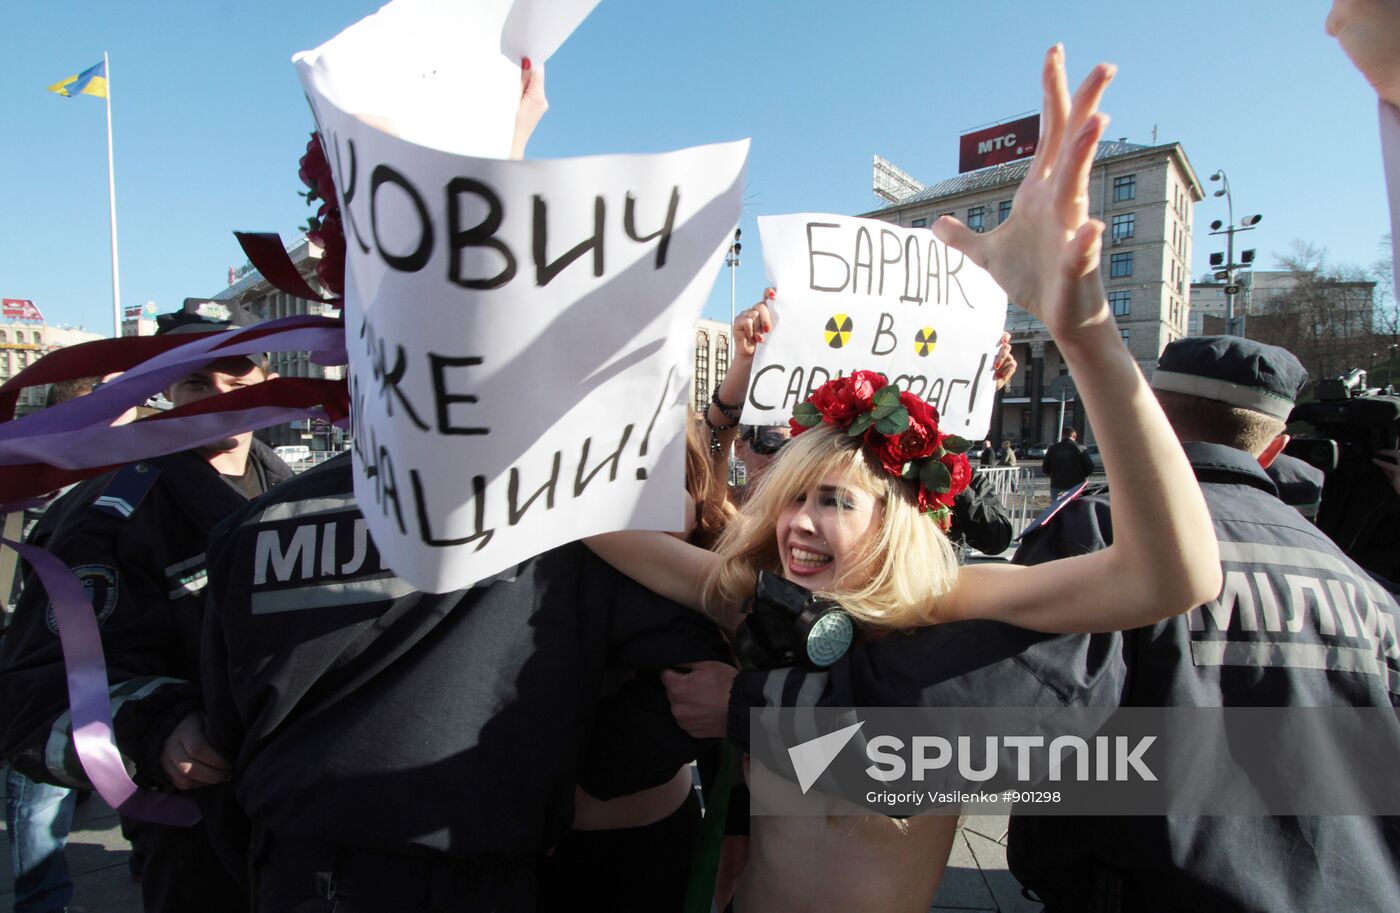 FEMEN activists hold Brothel To The Sarcophagus rally in Kiev